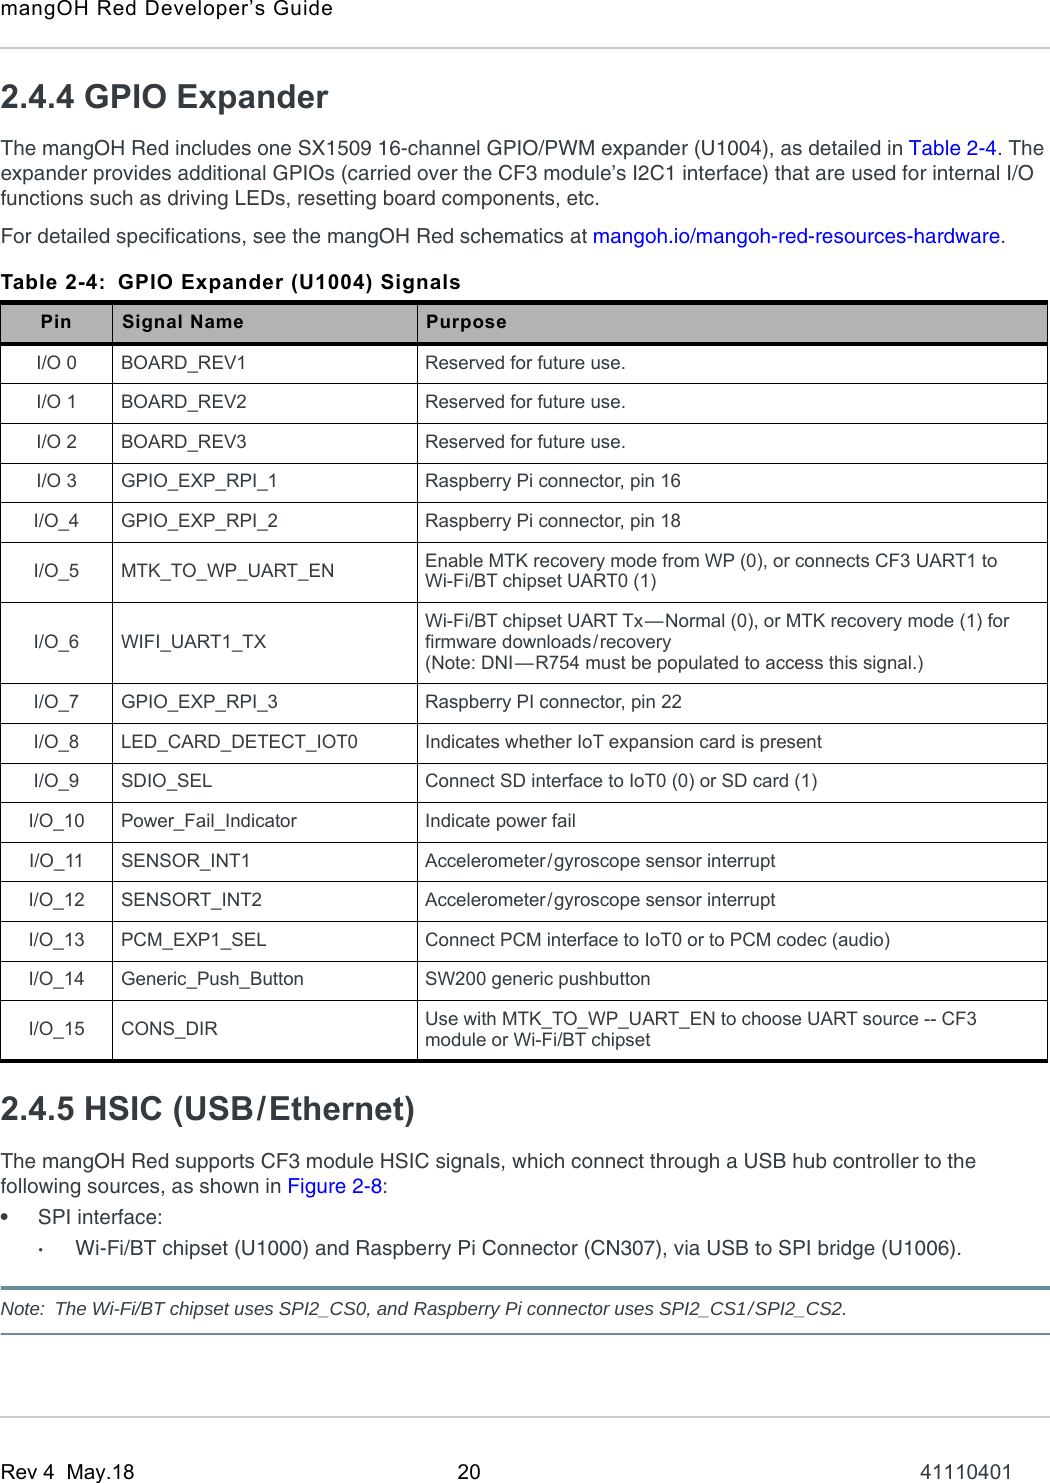 mangOH Red Developer’s GuideRev 4  May.18 20 411104012.4.4 GPIO ExpanderThe mangOH Red includes one SX1509 16-channel GPIO/PWM expander (U1004), as detailed in Table 2-4. The expander provides additional GPIOs (carried over the CF3 module’s I2C1 interface) that are used for internal I/O functions such as driving LEDs, resetting board components, etc.For detailed specifications, see the mangOH Red schematics at mangoh.io/mangoh-red-resources-hardware. 2.4.5 HSIC (USB/Ethernet)The mangOH Red supports CF3 module HSIC signals, which connect through a USB hub controller to the following sources, as shown in Figure 2-8:•SPI interface:·Wi-Fi/BT chipset (U1000) and Raspberry Pi Connector (CN307), via USB to SPI bridge (U1006).Note: The Wi-Fi/BT chipset uses SPI2_CS0, and Raspberry Pi connector uses SPI2_CS1/SPI2_CS2.Table 2-4: GPIO Expander (U1004) SignalsPin Signal Name PurposeI/O 0 BOARD_REV1 Reserved for future use.I/O 1 BOARD_REV2 Reserved for future use.I/O 2 BOARD_REV3 Reserved for future use.I/O 3 GPIO_EXP_RPI_1 Raspberry Pi connector, pin 16I/O_4 GPIO_EXP_RPI_2 Raspberry Pi connector, pin 18I/O_5 MTK_TO_WP_UART_EN Enable MTK recovery mode from WP (0), or connects CF3 UART1 to Wi-Fi/BT chipset UART0 (1)I/O_6 WIFI_UART1_TXWi-Fi/BT chipset UART Tx—Normal (0), or MTK recovery mode (1) for firmware downloads/recovery(Note: DNI—R754 must be populated to access this signal.)I/O_7 GPIO_EXP_RPI_3 Raspberry PI connector, pin 22I/O_8 LED_CARD_DETECT_IOT0 Indicates whether IoT expansion card is presentI/O_9 SDIO_SEL Connect SD interface to IoT0 (0) or SD card (1)I/O_10 Power_Fail_Indicator Indicate power failI/O_11 SENSOR_INT1 Accelerometer/gyroscope sensor interruptI/O_12 SENSORT_INT2 Accelerometer/gyroscope sensor interruptI/O_13 PCM_EXP1_SEL Connect PCM interface to IoT0 or to PCM codec (audio)I/O_14 Generic_Push_Button SW200 generic pushbuttonI/O_15 CONS_DIR Use with MTK_TO_WP_UART_EN to choose UART source -- CF3 module or Wi-Fi/BT chipset